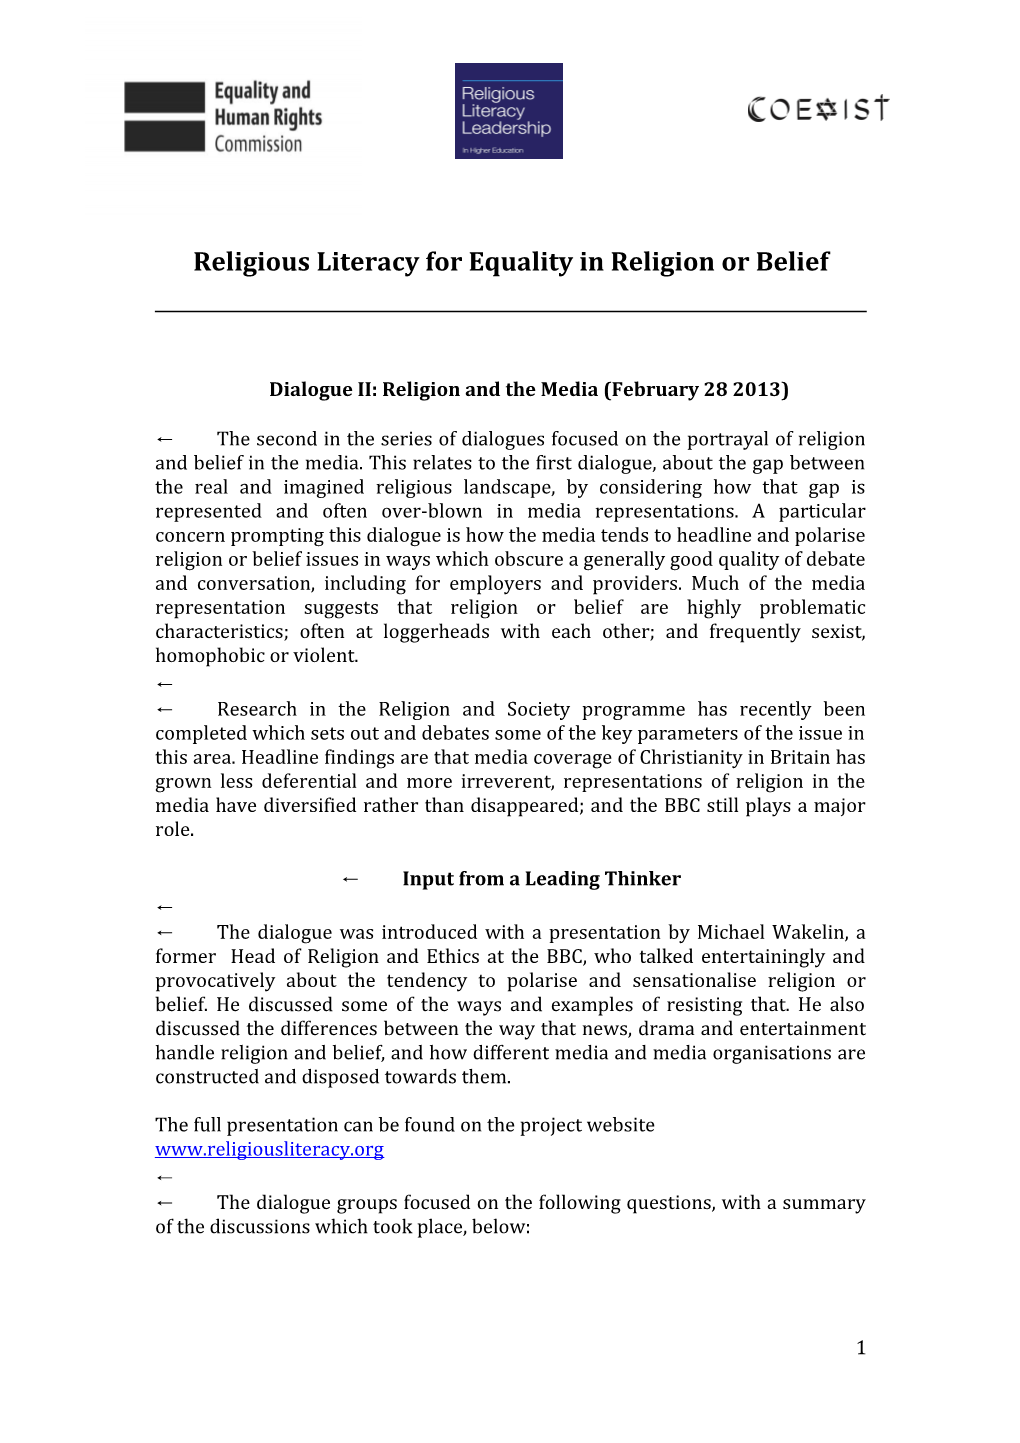 Religious Literacy for Equality in Religion Or Belief